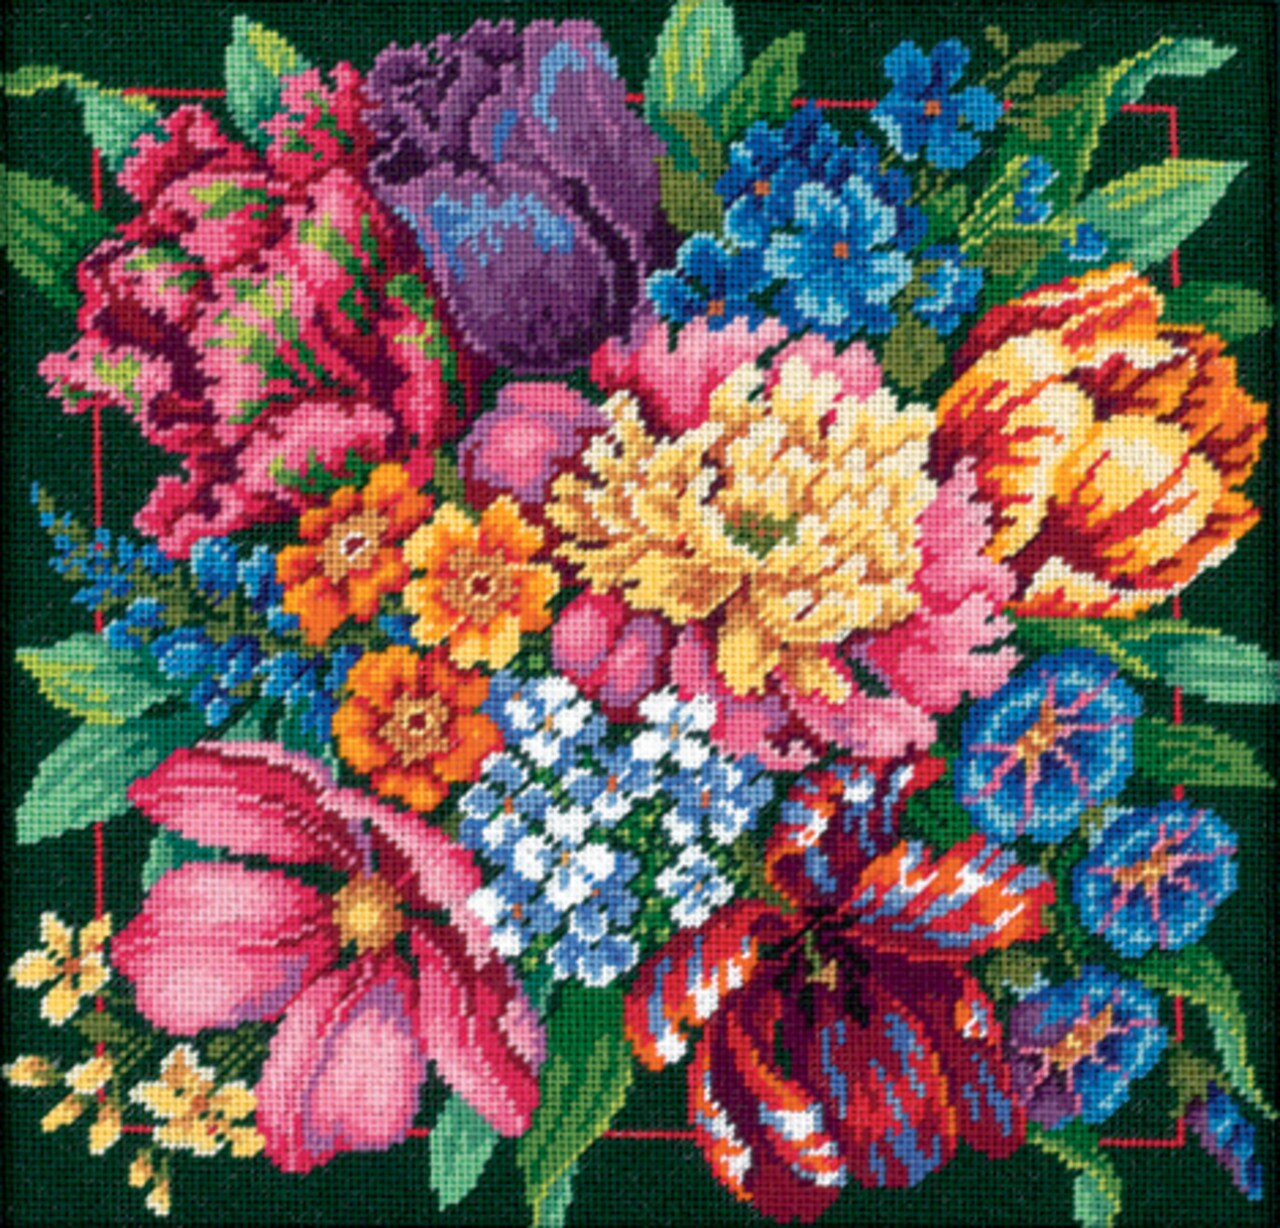 Dimensions Needlepoint Kit 14X14-Floral Splendor Stitched In Yarn